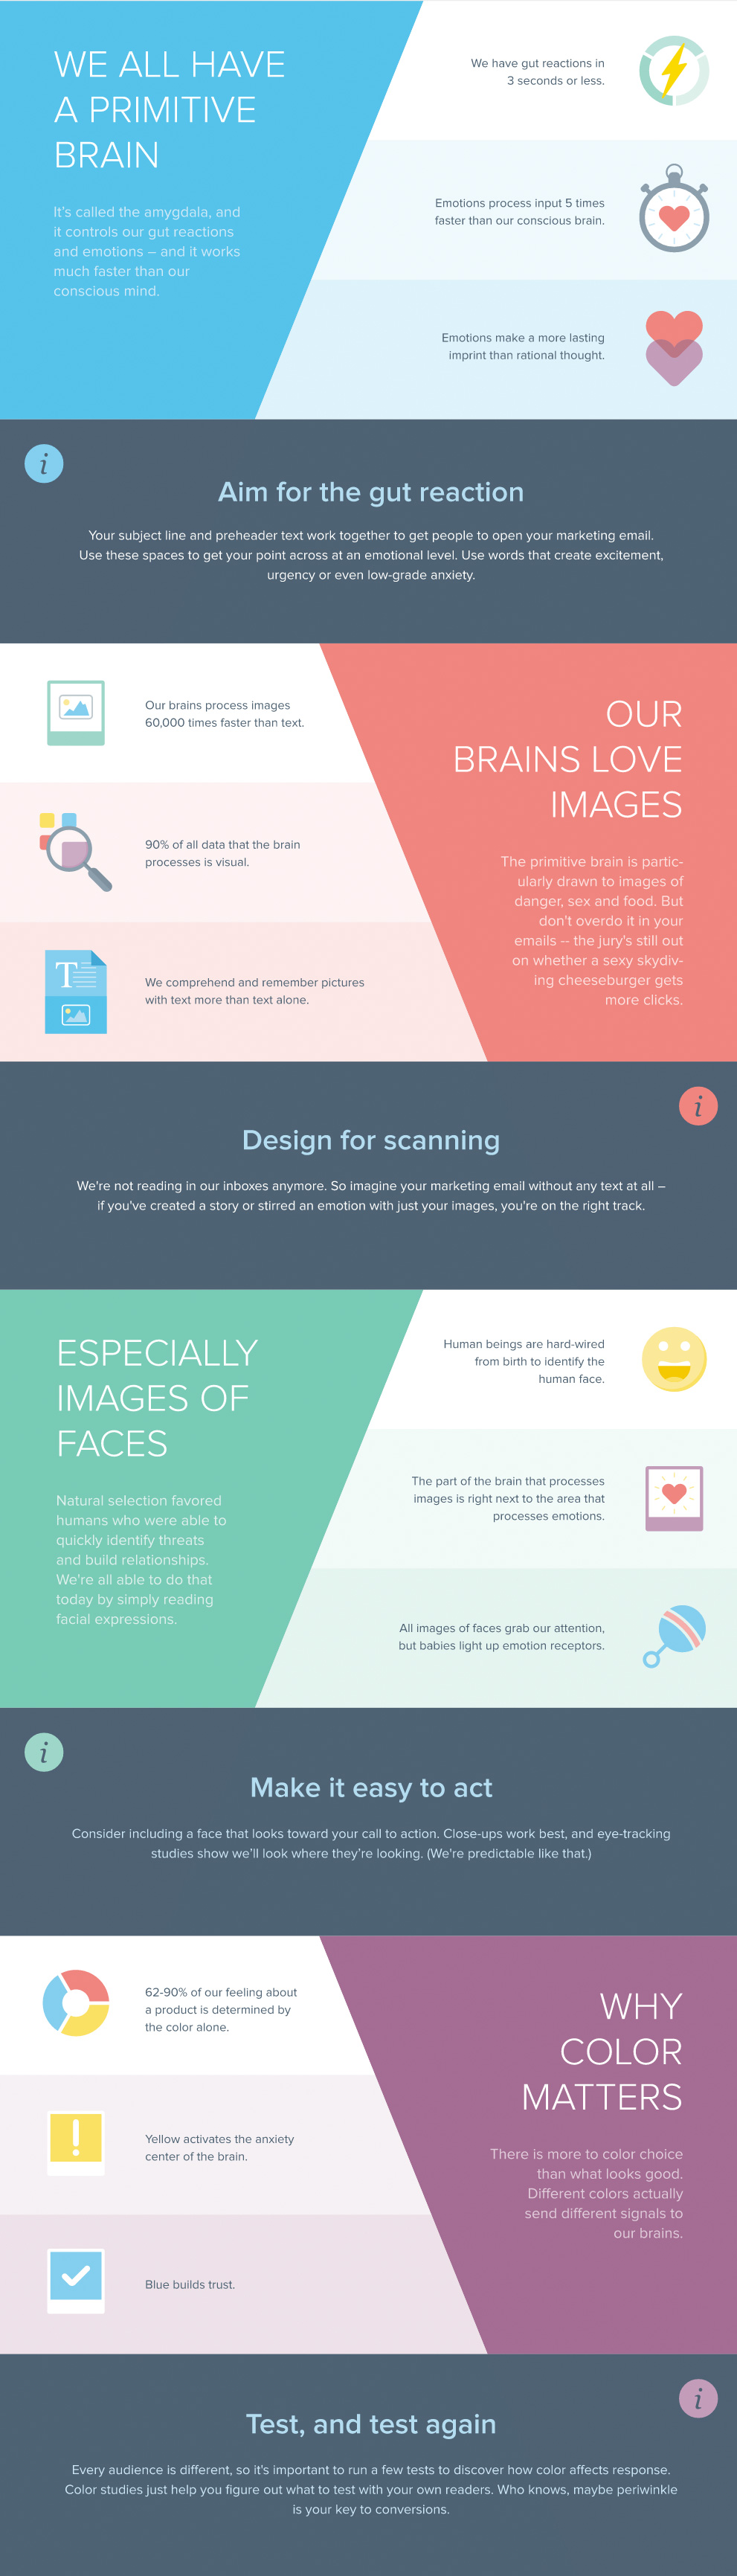 12 Facts About the Human Brain That Will Make Your Marketing More Successful (Infographic)